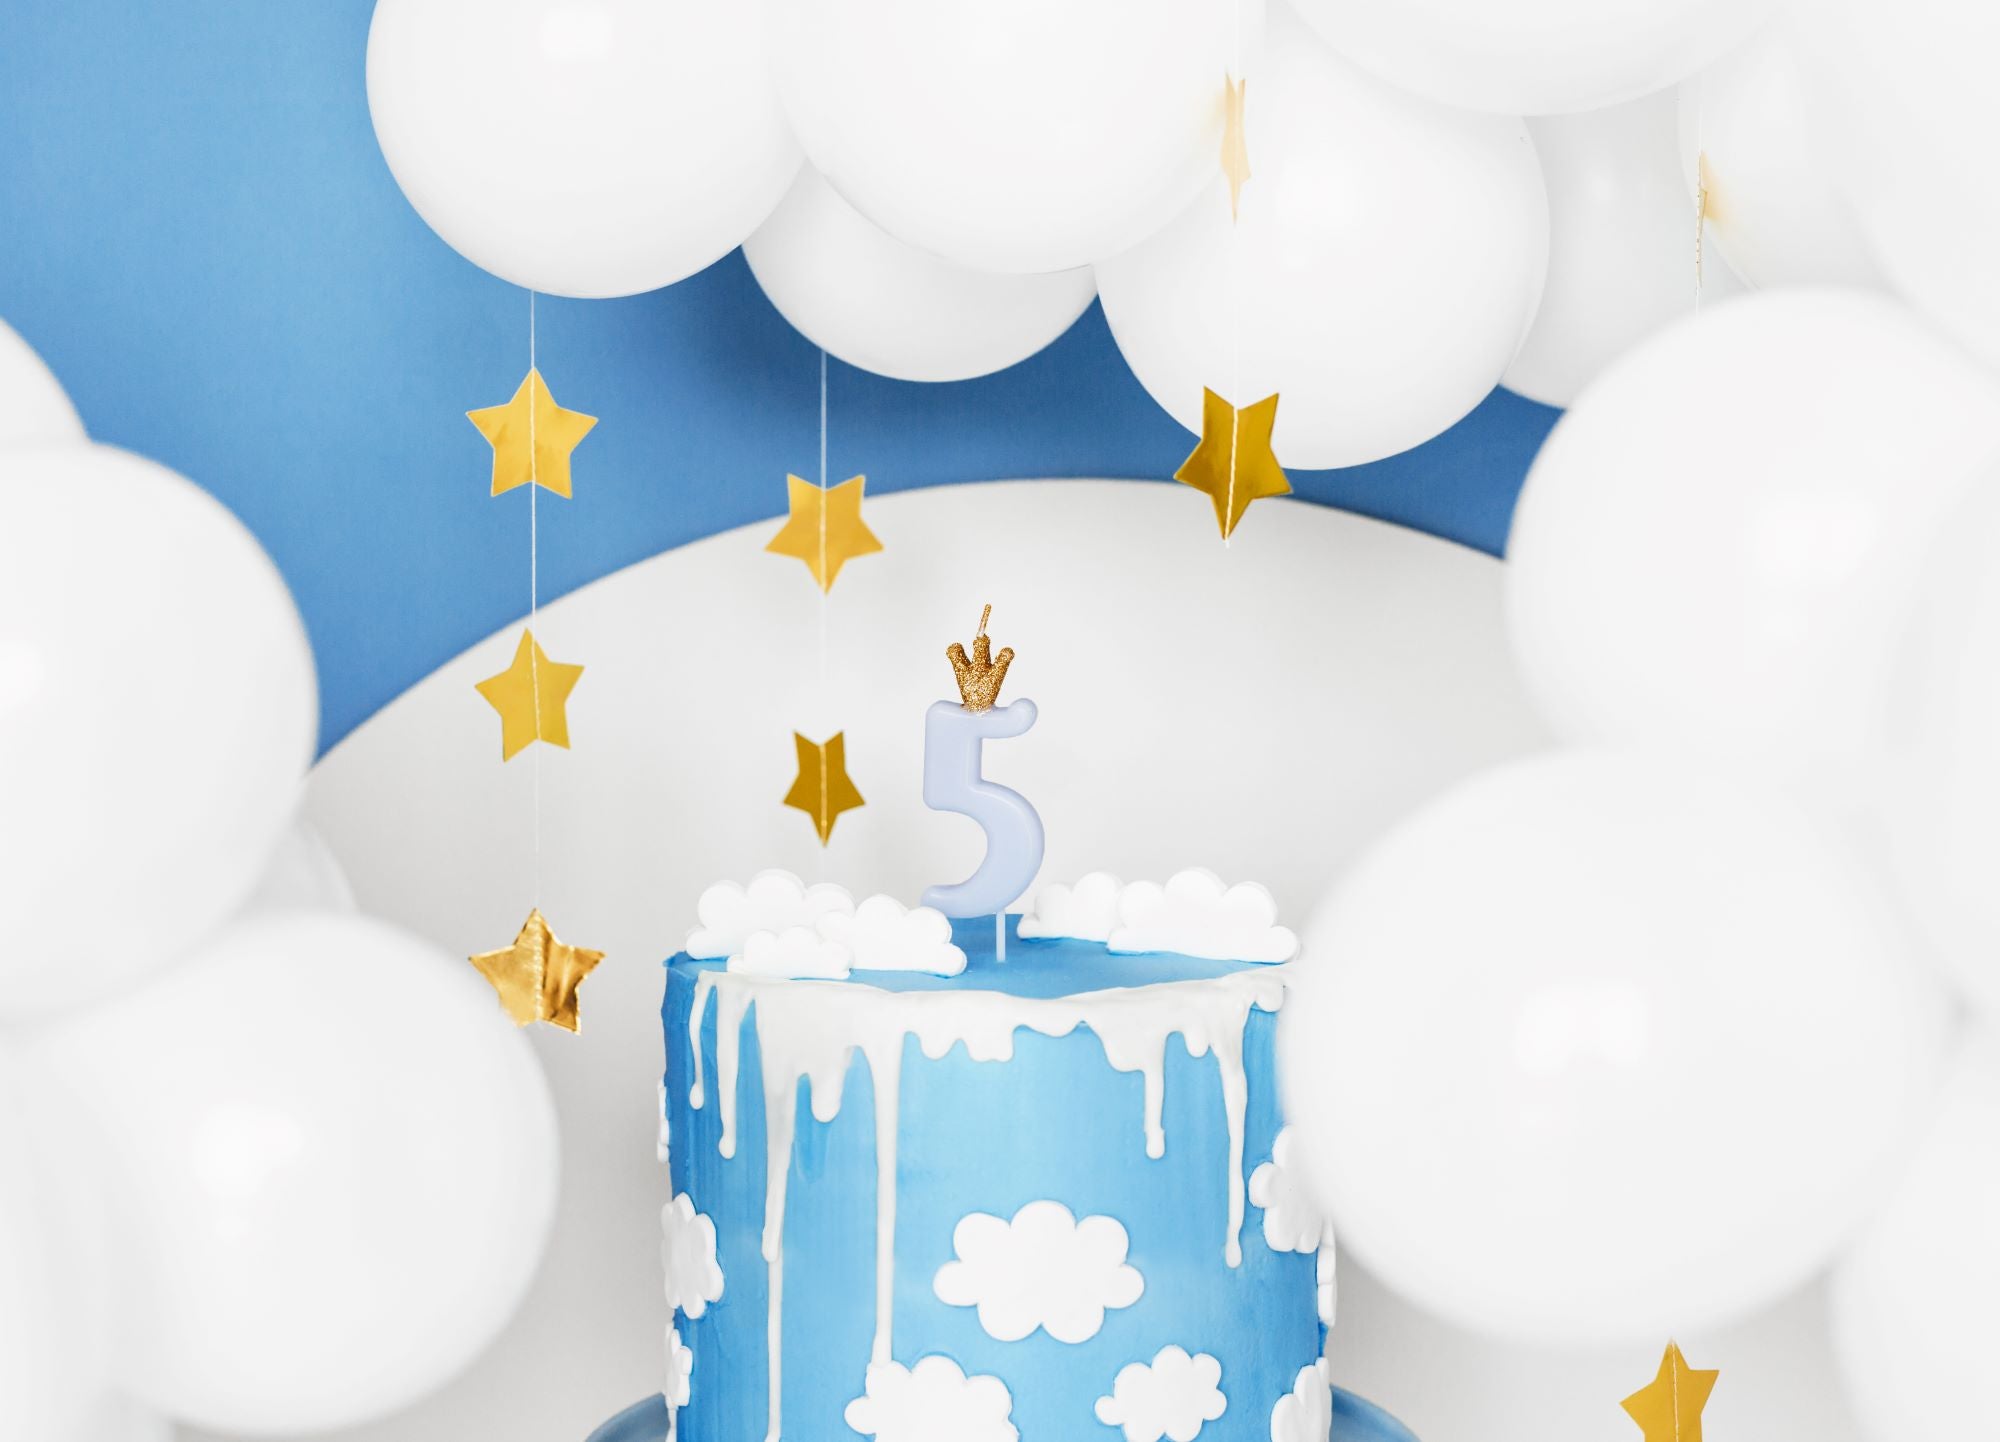 Blue Number 5 Birthday Candle with gold Crown